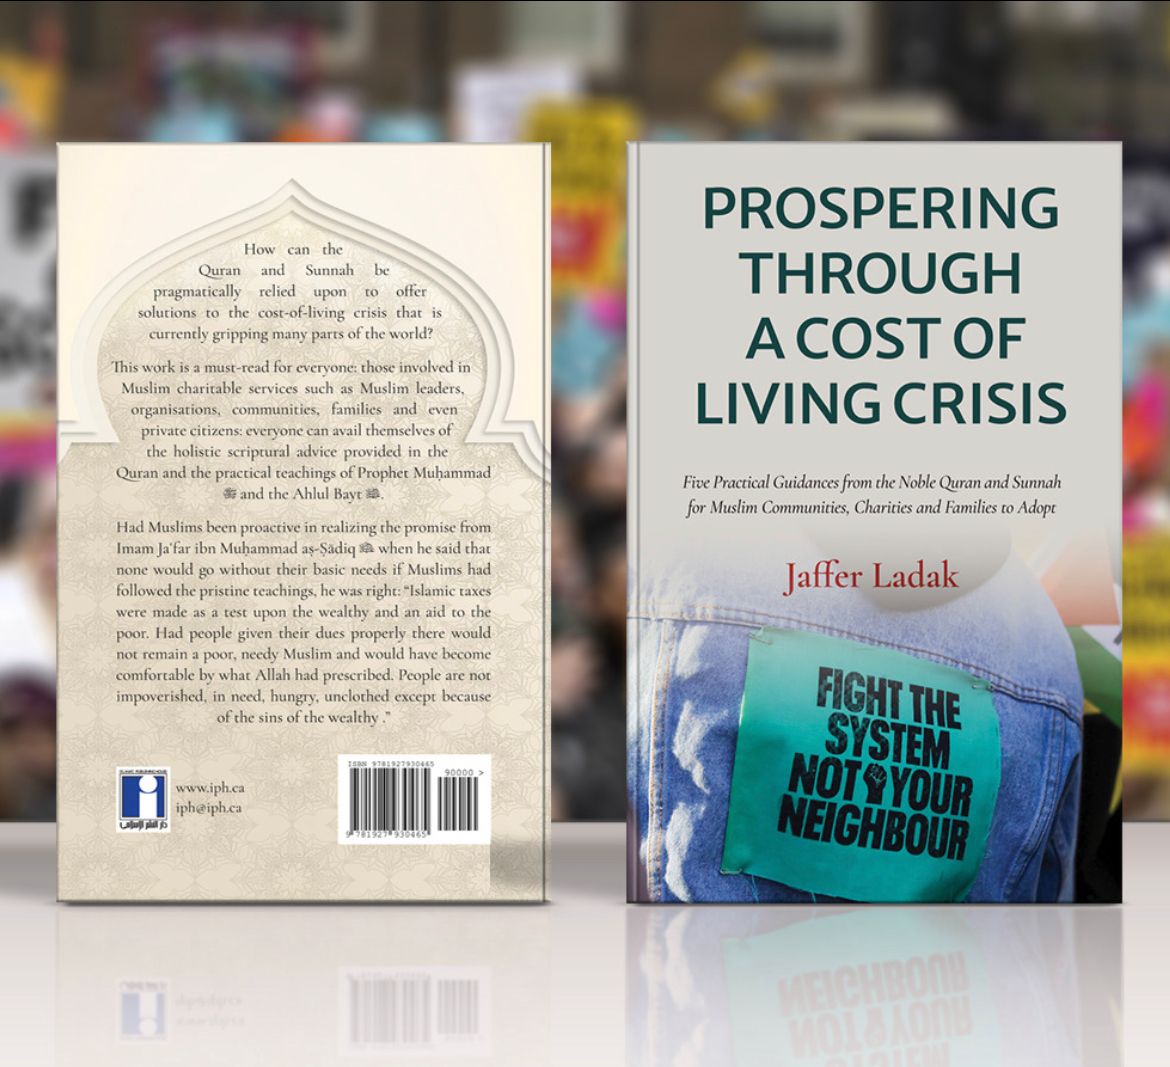 Prospering Through a Cost of Living Crisis